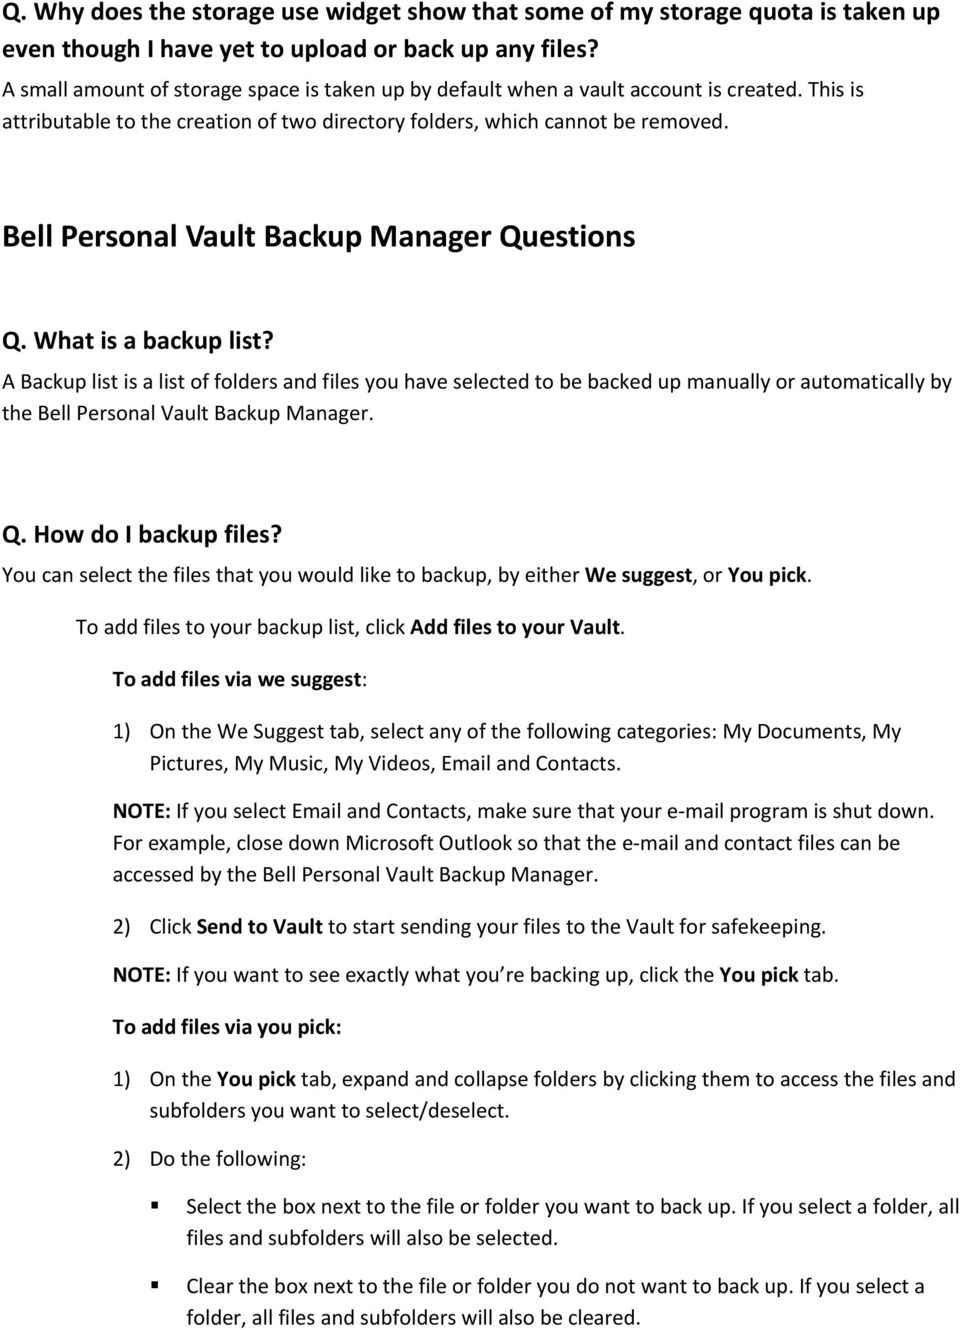 Bell Personal Vault Backup Manager Questions Q. What is a backup list?